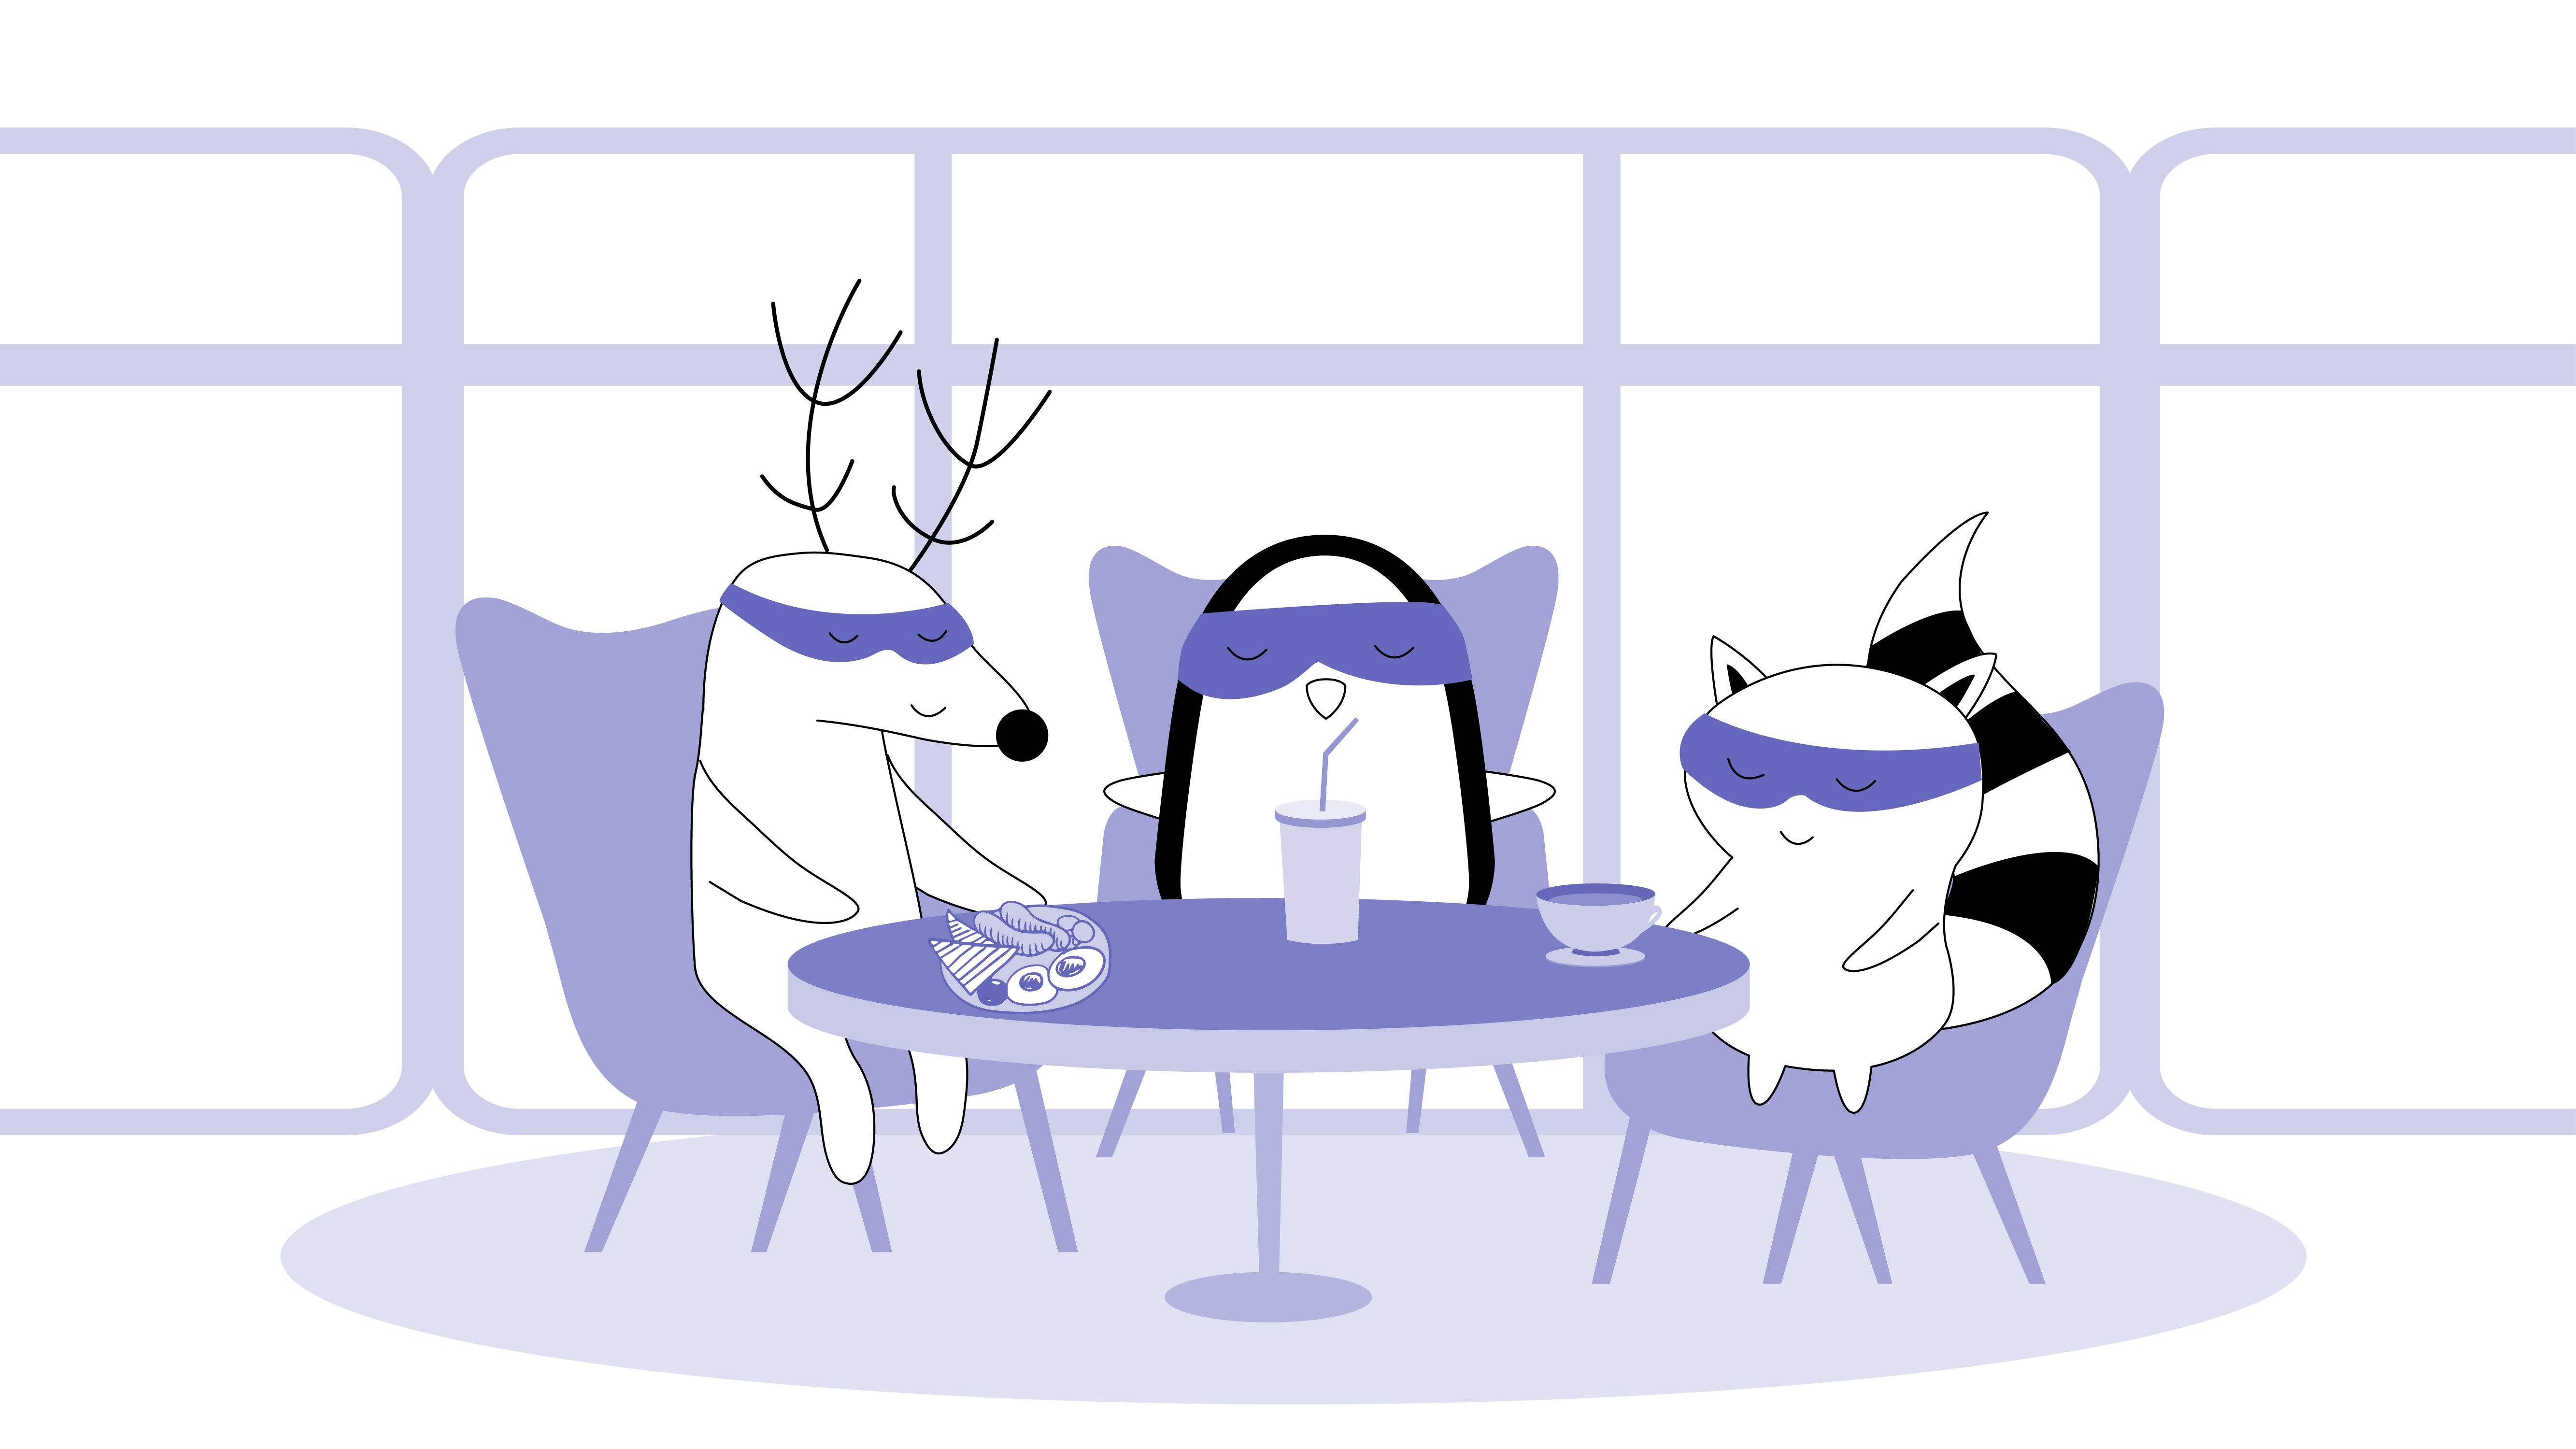 Soren, Pocky, and Iggy are having breakfast at a local café.